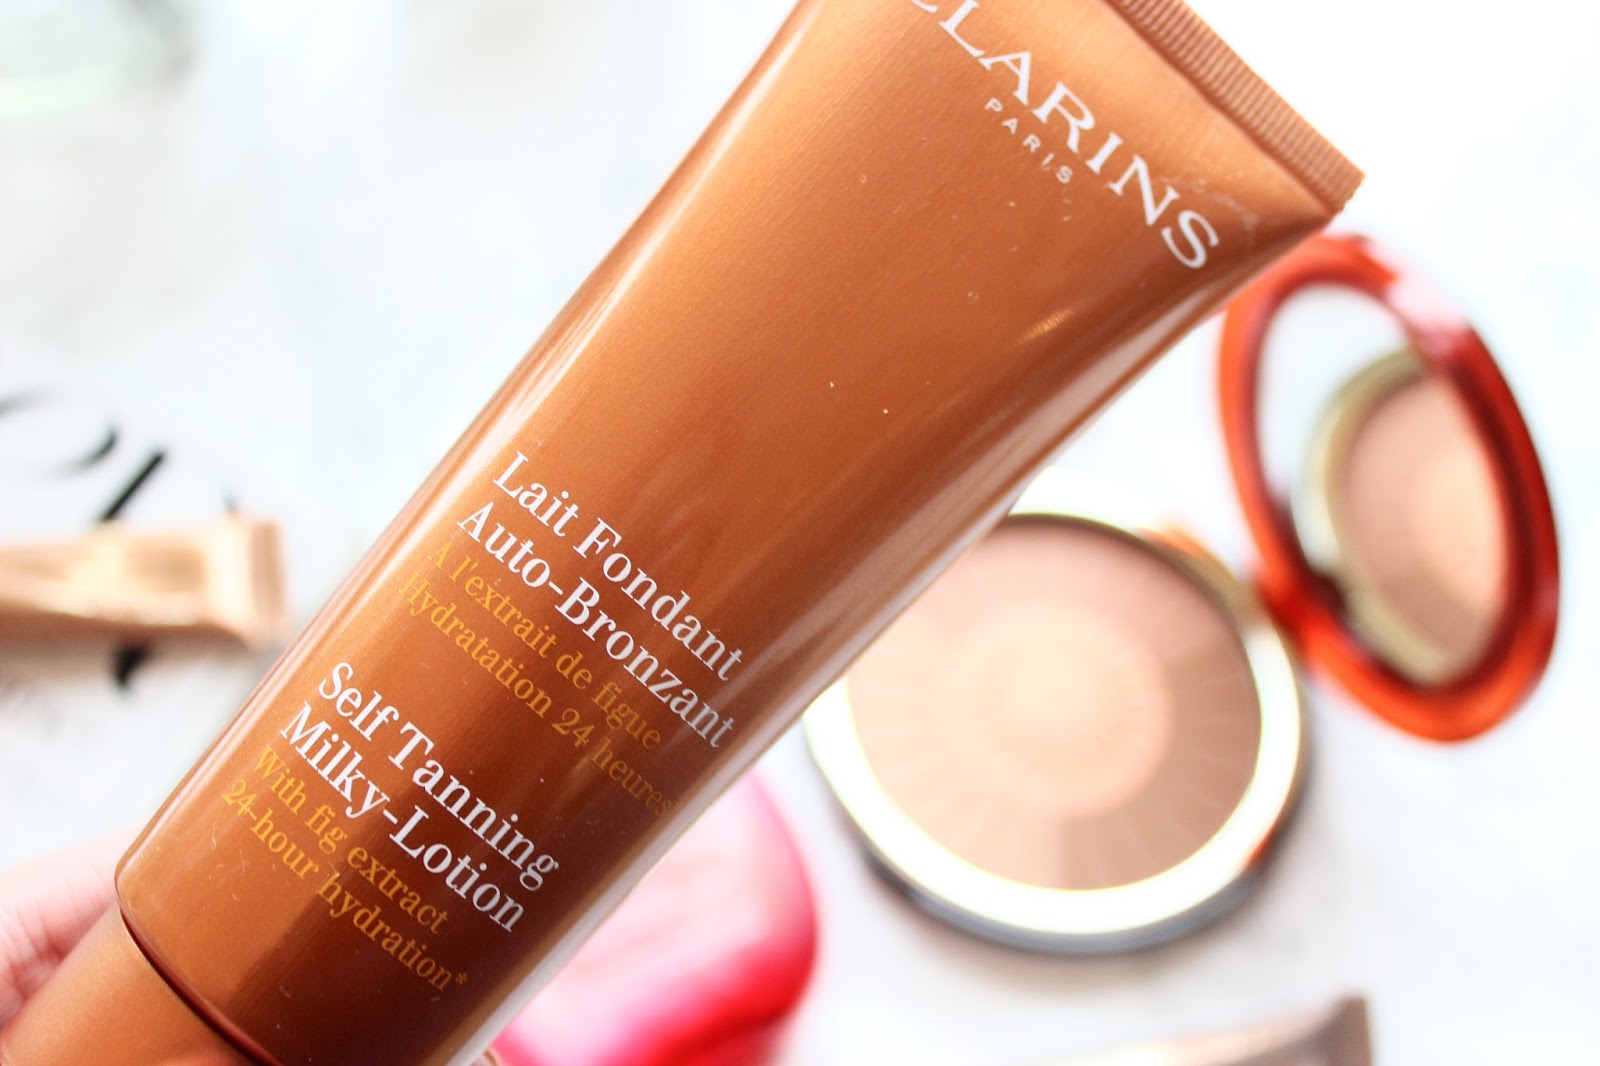 Clarins Summer Collection